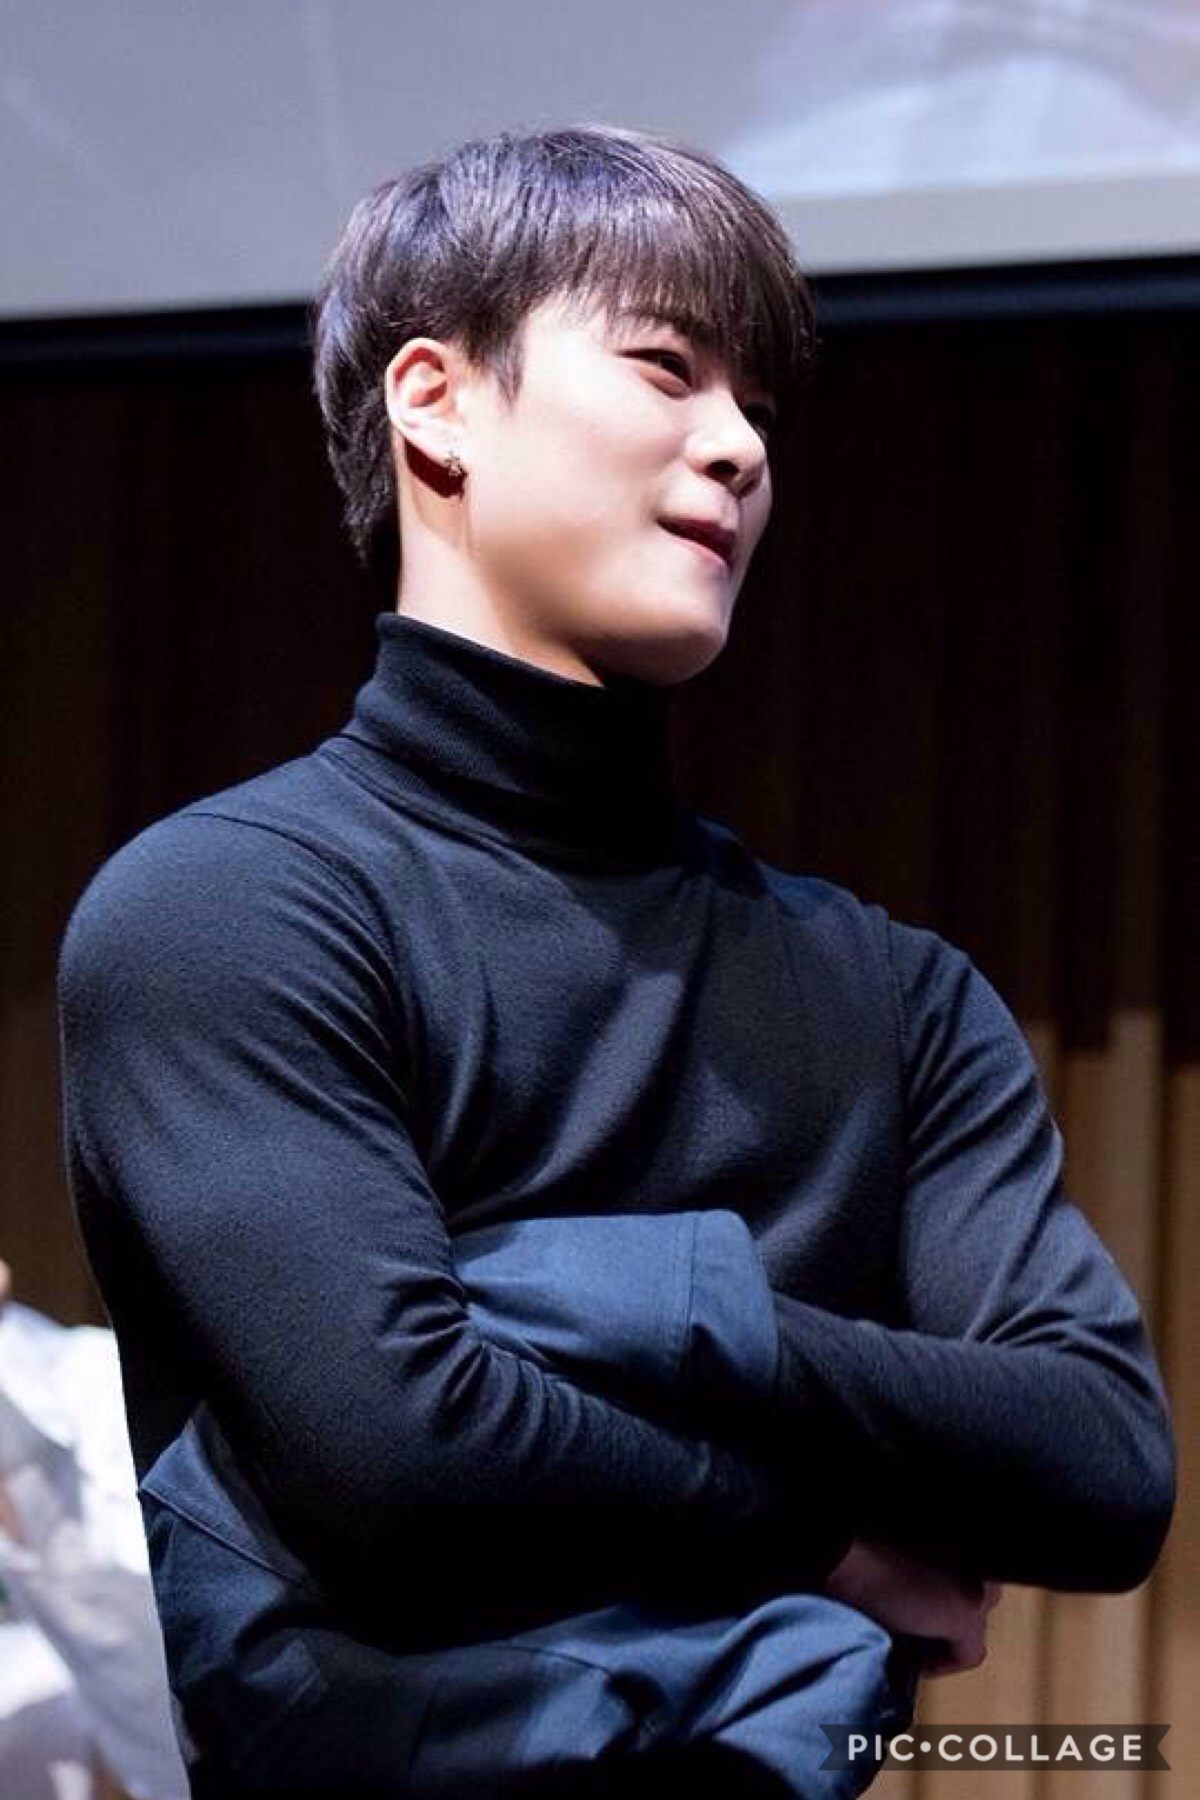 click
song rec: Love Lies by Khalid and Normani

I just found this pic of moon bin and my soul has left by body to ascend to heaven 💀🙃